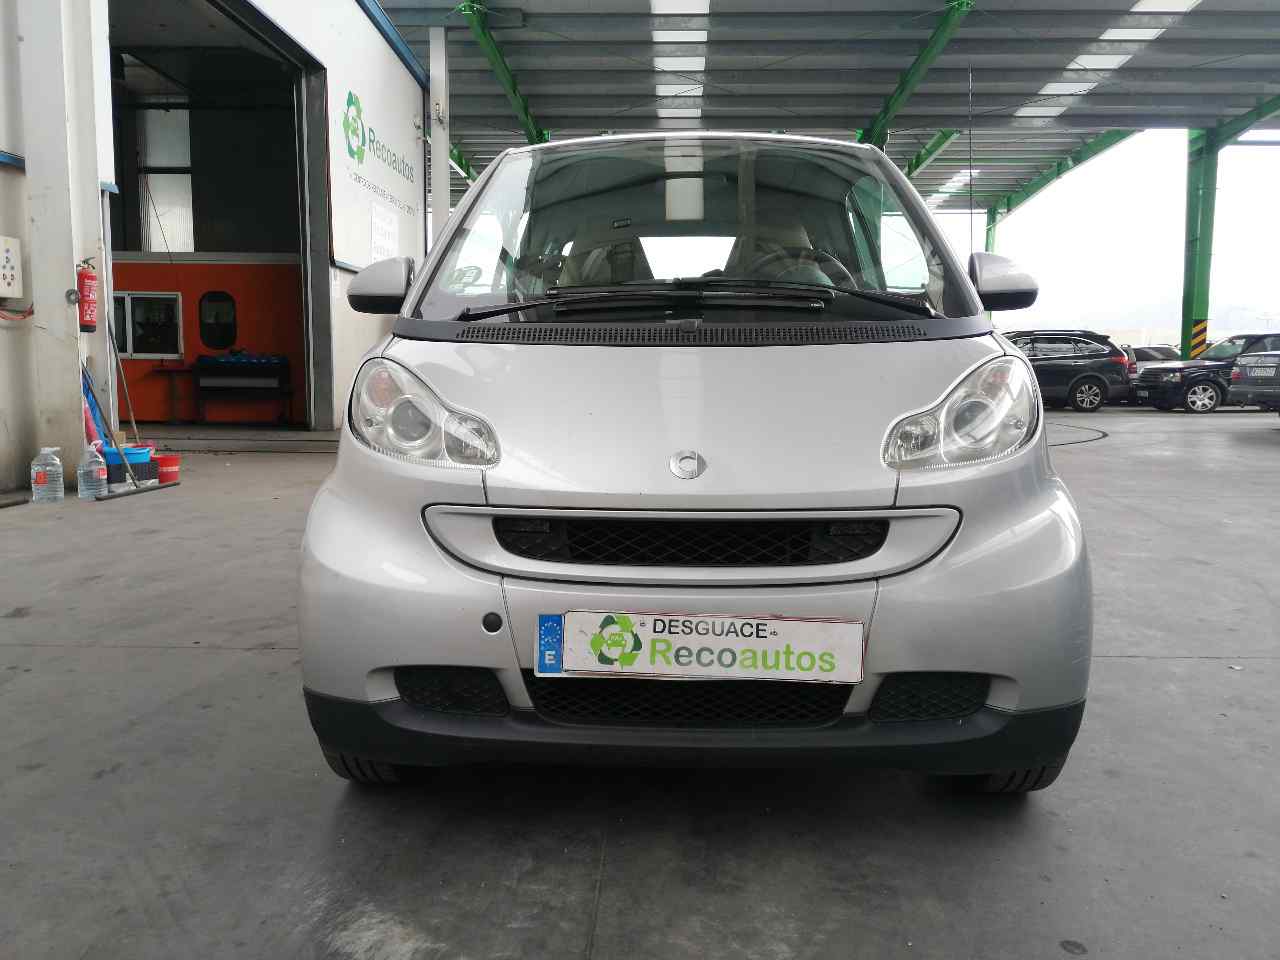 SMART Fortwo 2 generation (2007-2015) Other Control Units A4518200026, 5WK11517ABF, SIEMMENSVDO 24139247